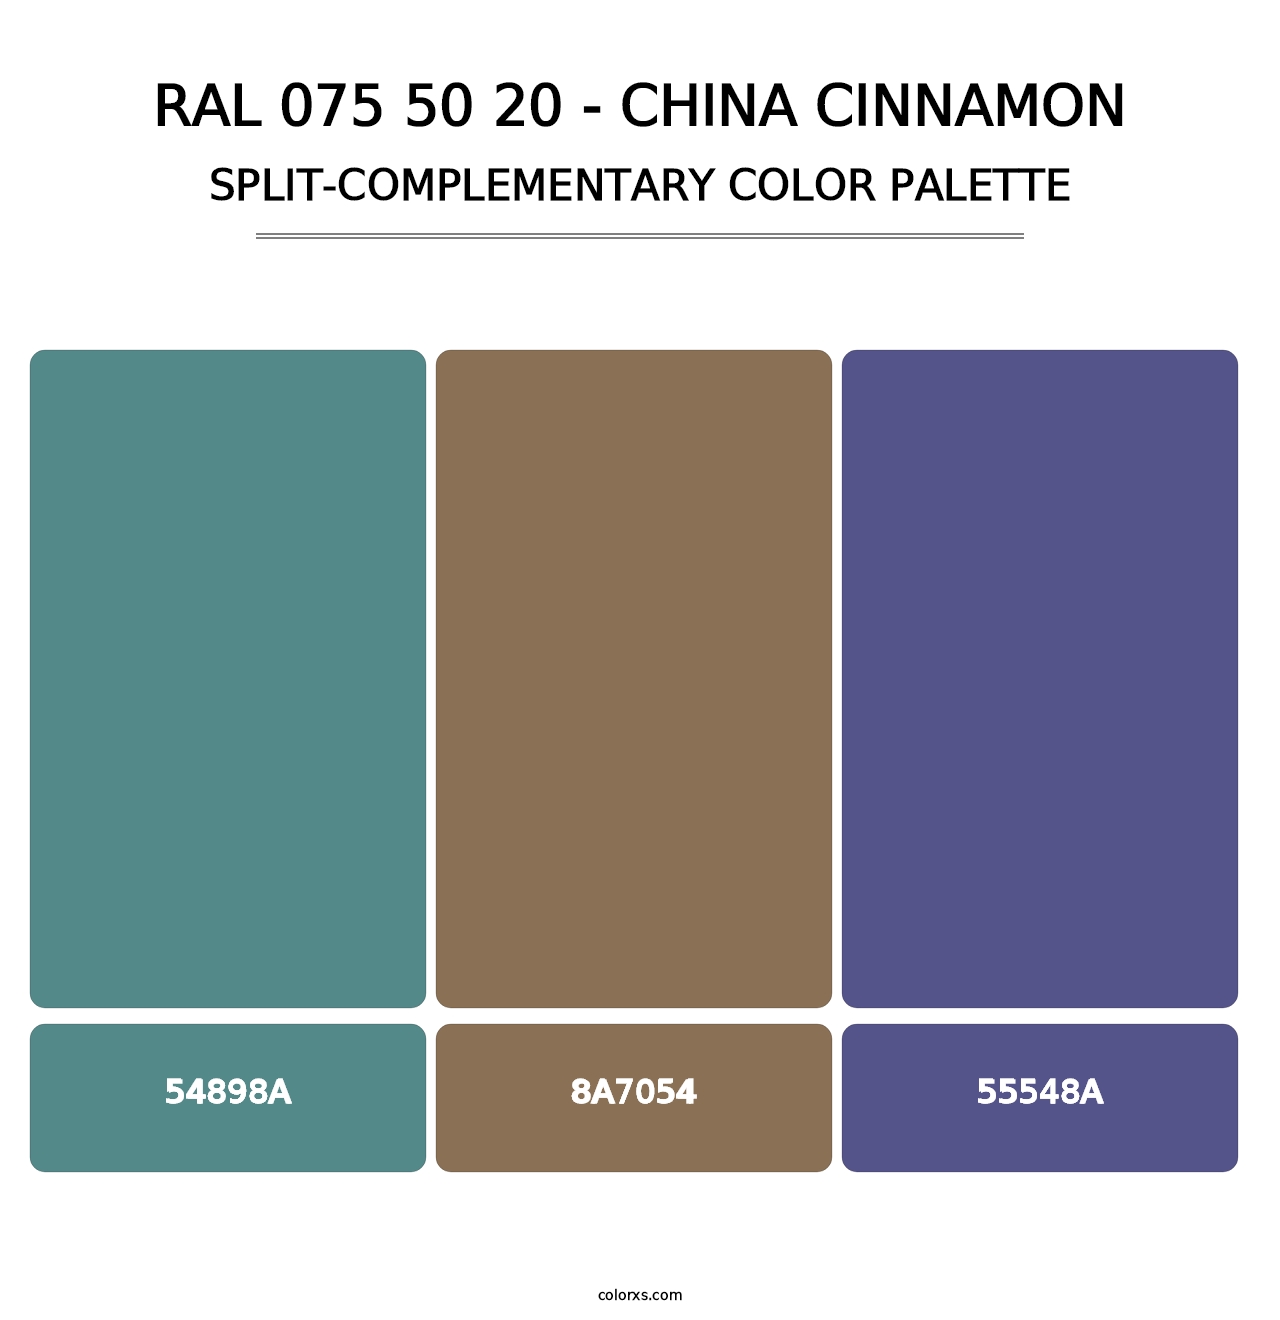 RAL 075 50 20 - China Cinnamon - Split-Complementary Color Palette